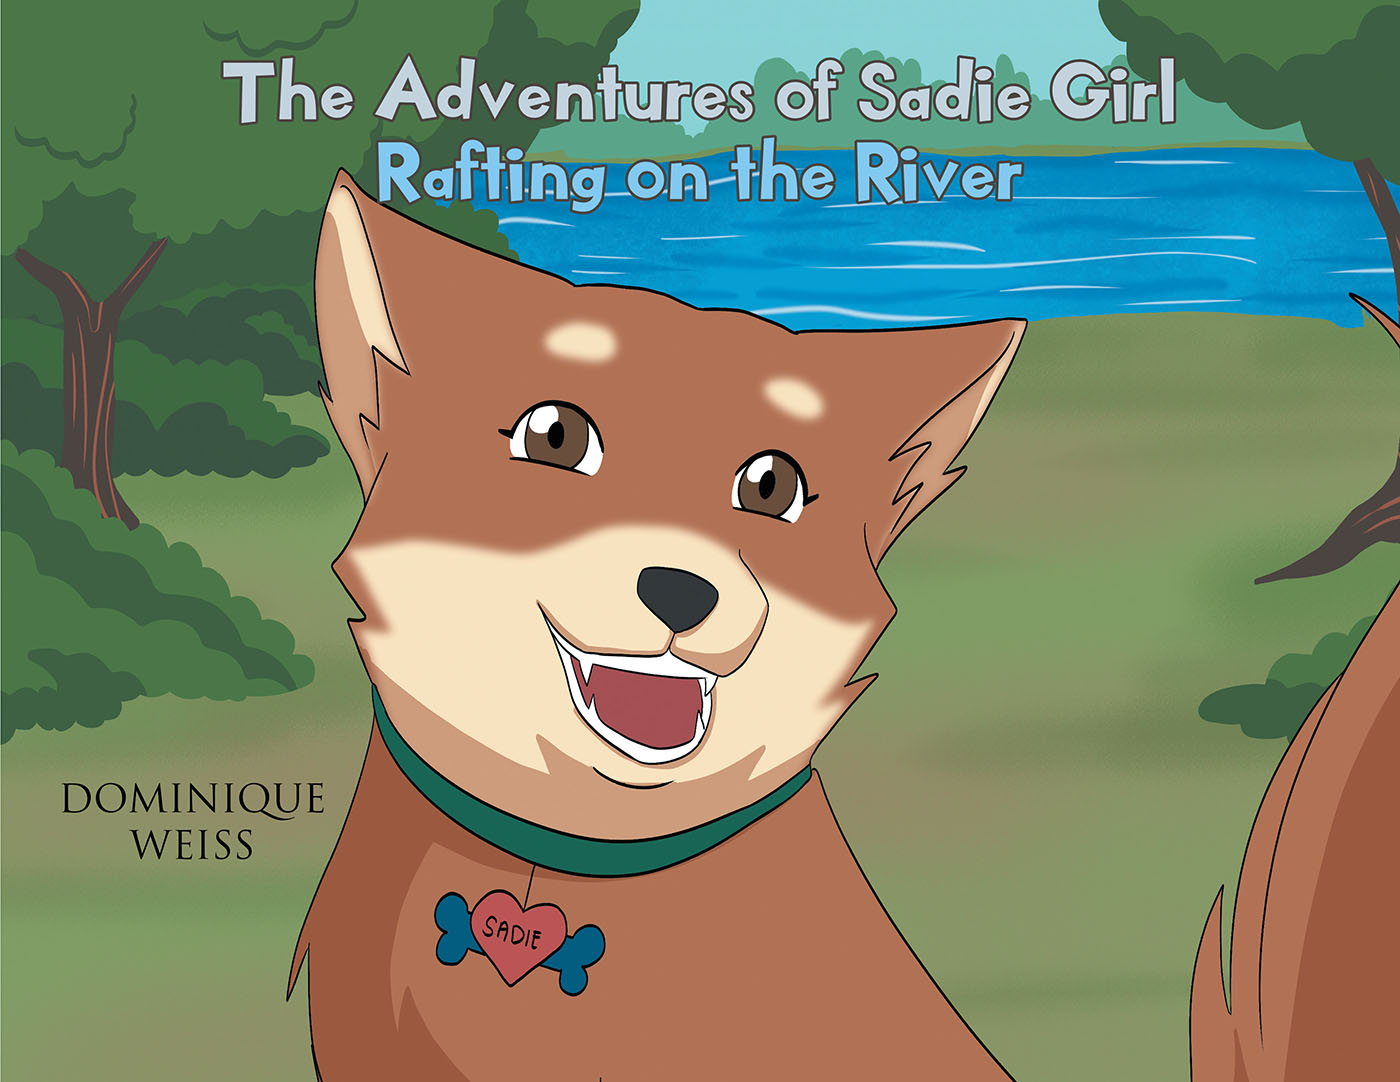 Dominique Weiss’s New Book, "The Adventures of Sadie Girl: Rafting on the River," is a Delightful Children’s Tale That Follows the Impressive Explorations of Sadie Girl